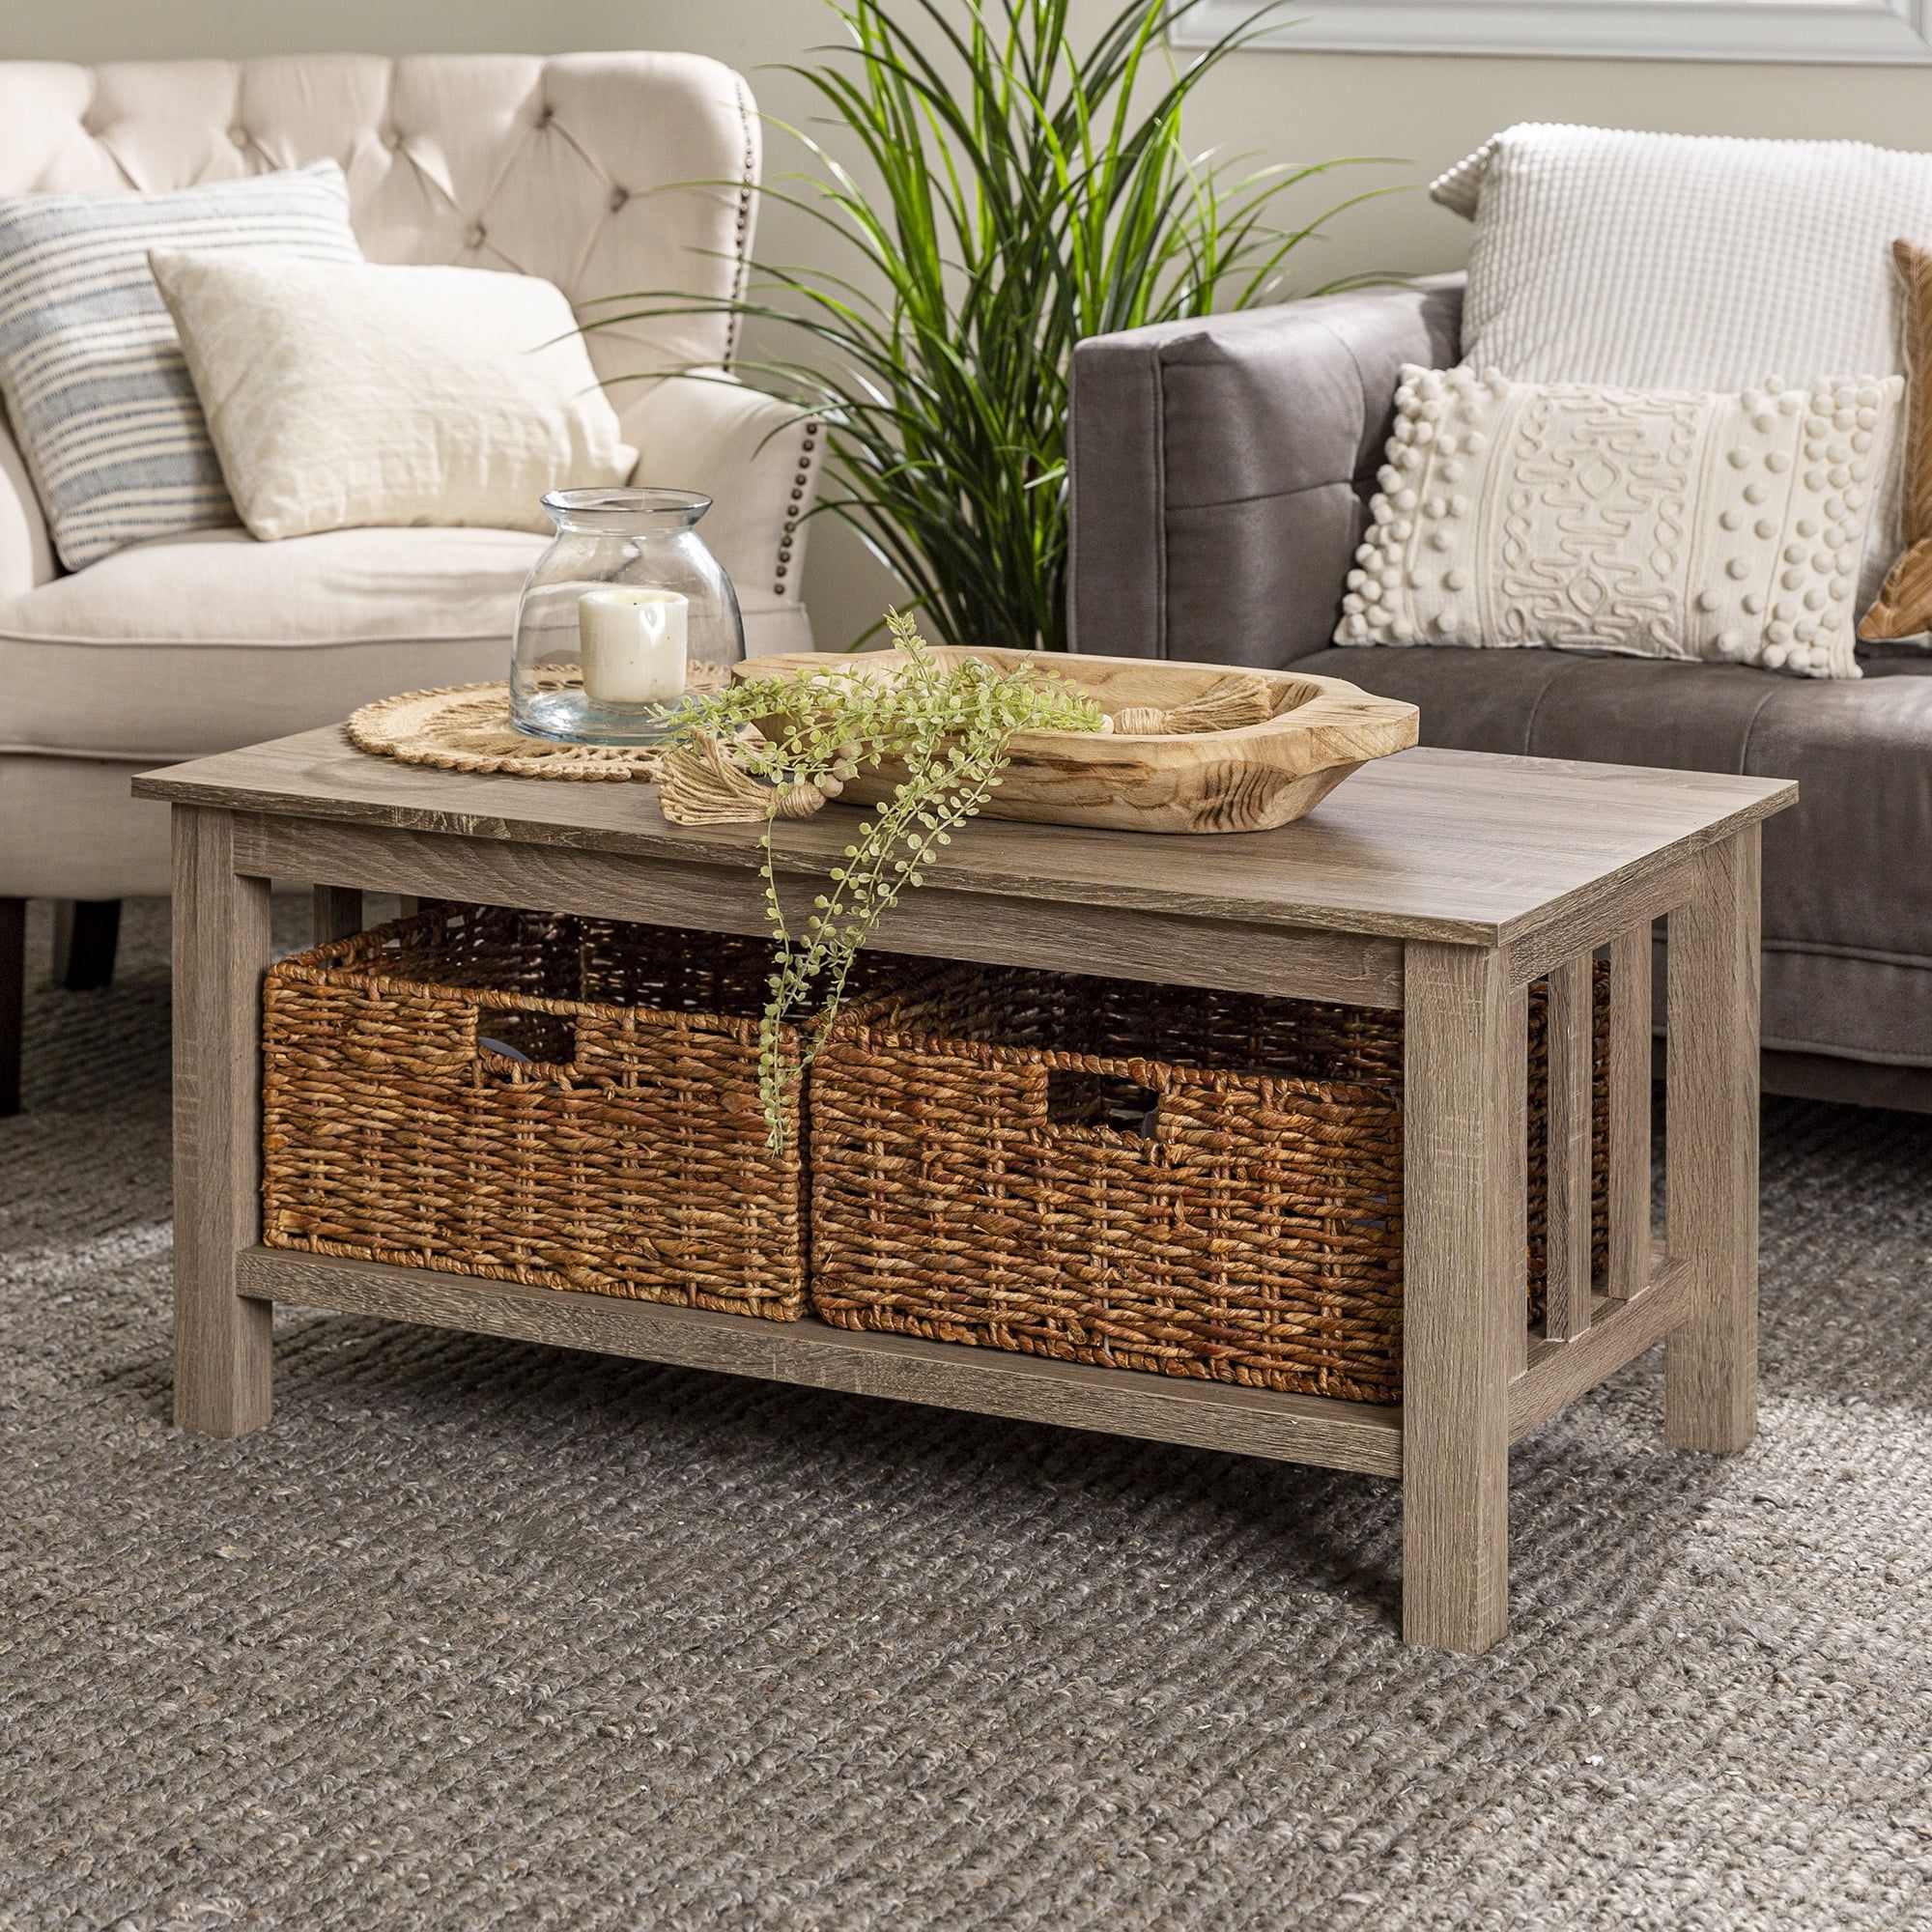 Woven Paths Traditional Storage Coffee Table W/ Bins $110 At Walmart With Woven Paths Coffee Tables (View 13 of 20)